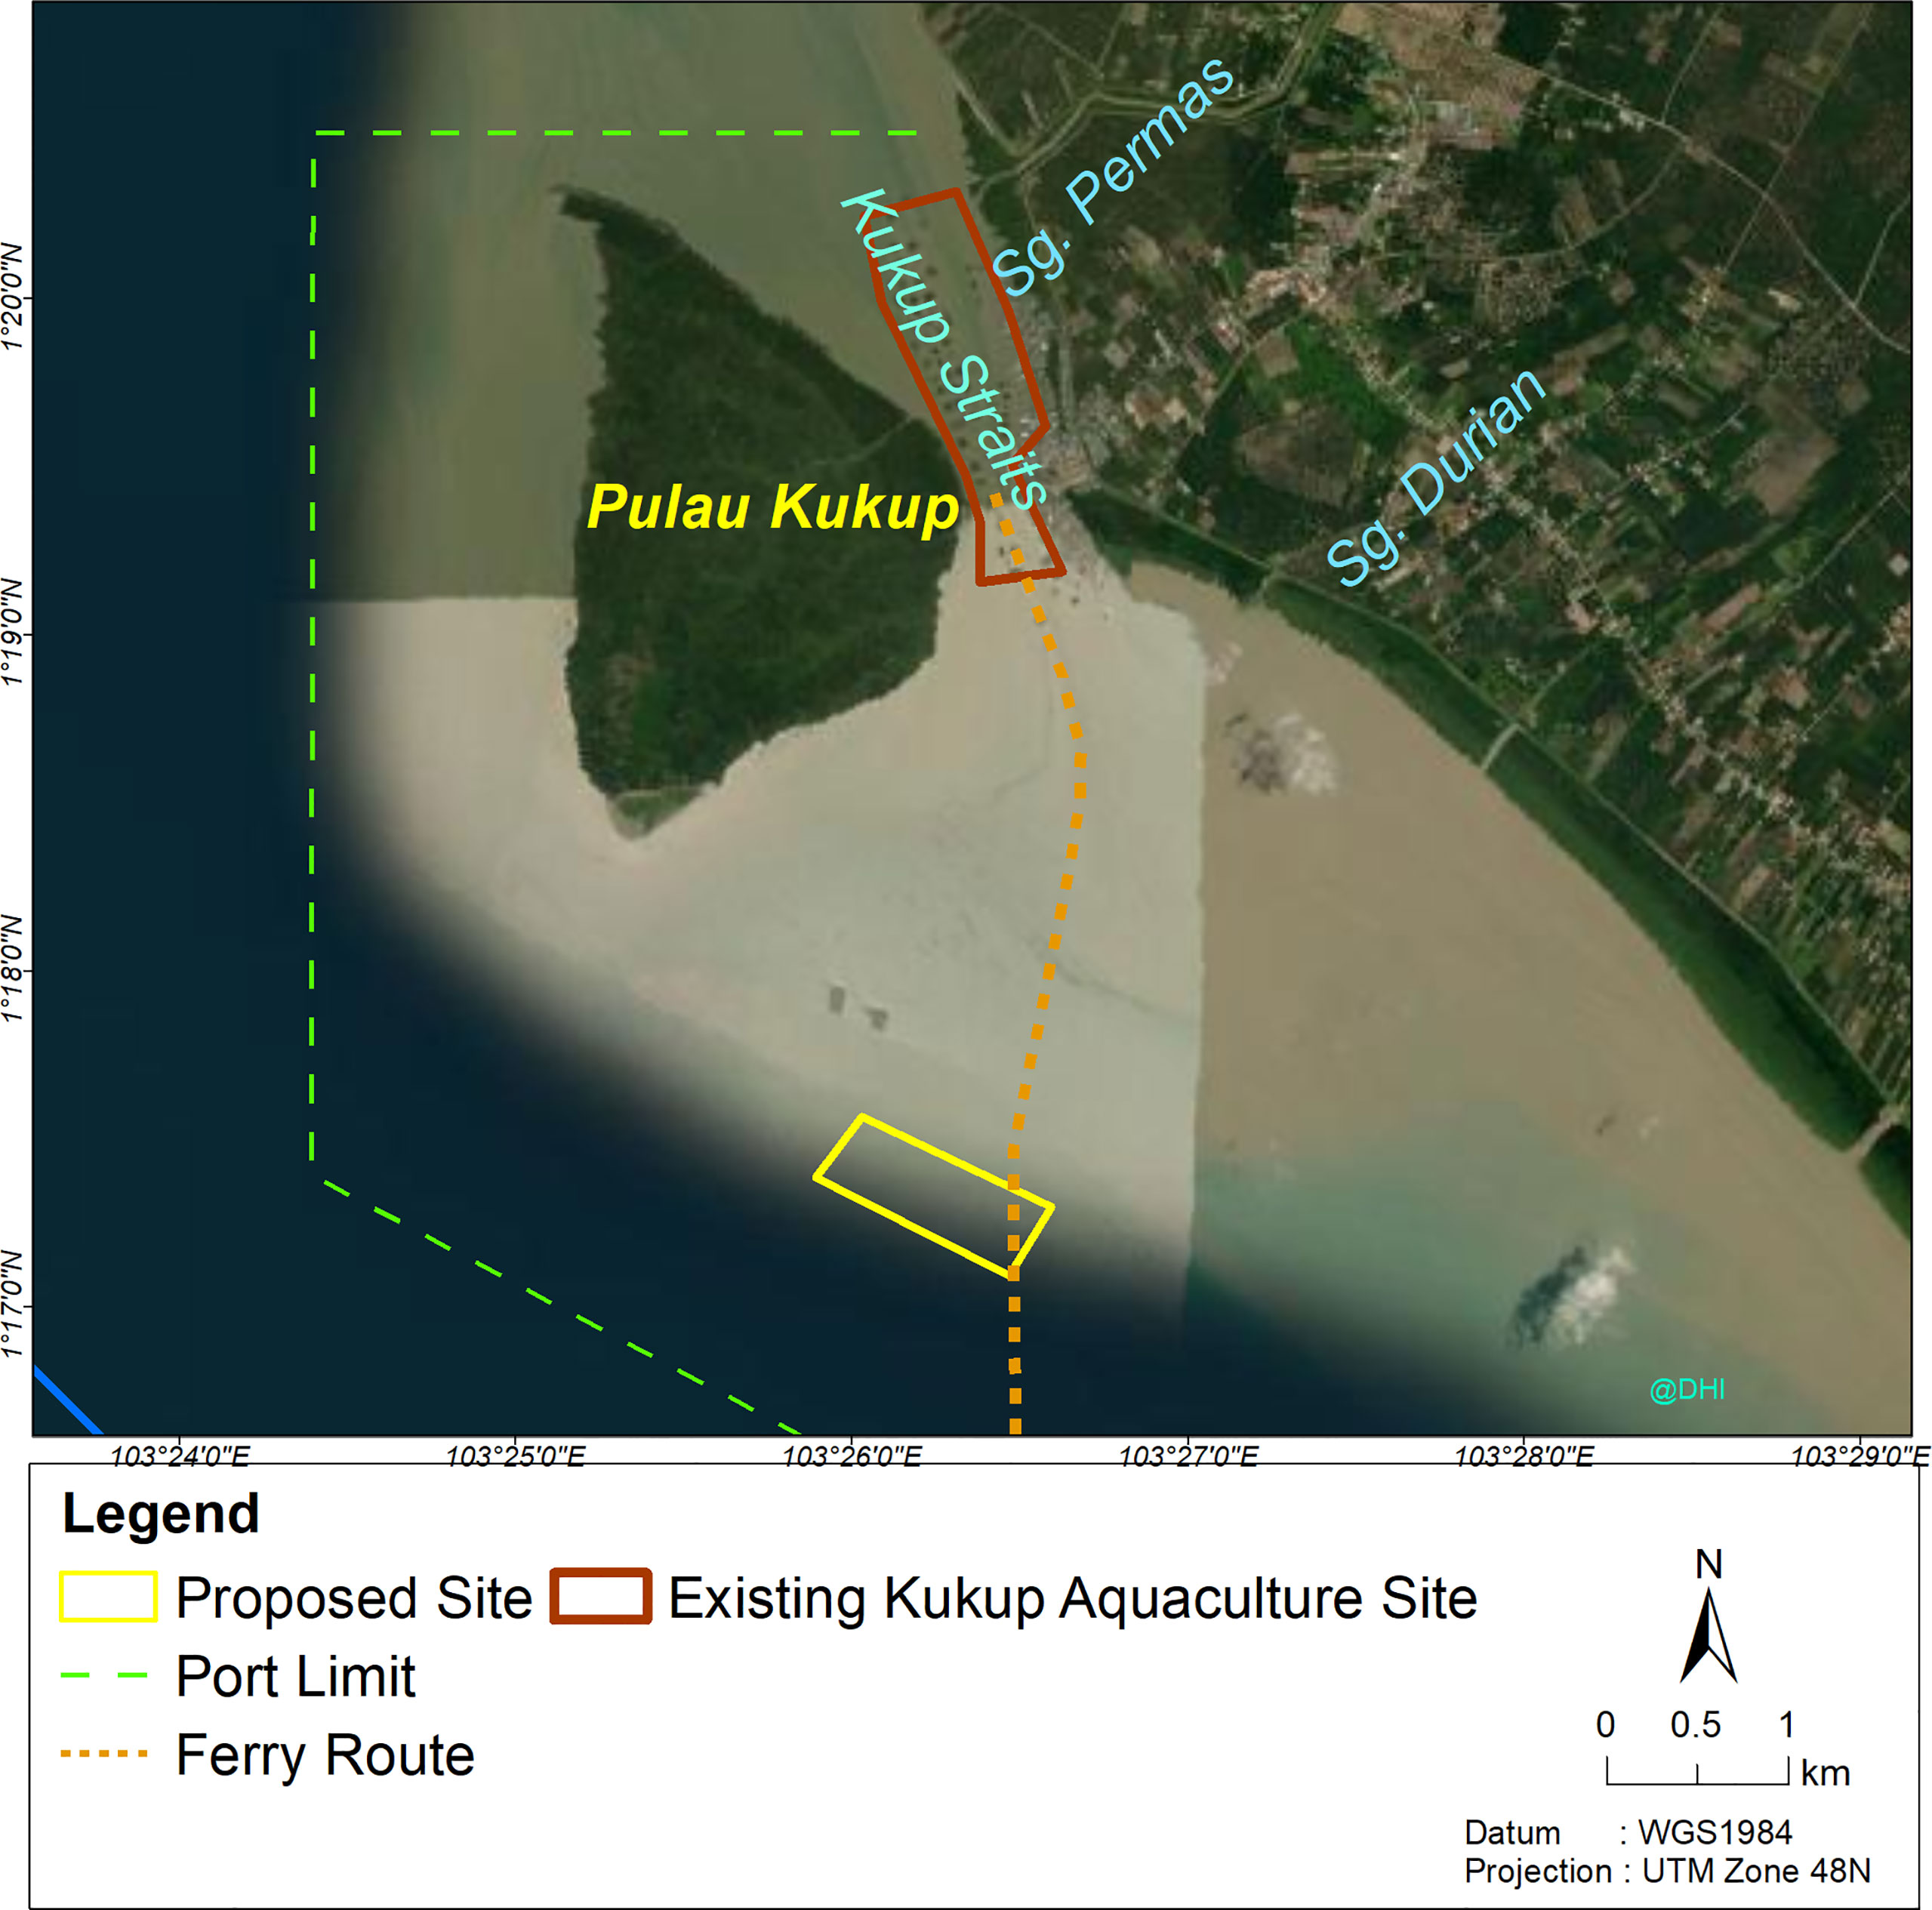 Frontiers  Spatial Analysis for Mariculture Site Selection: A